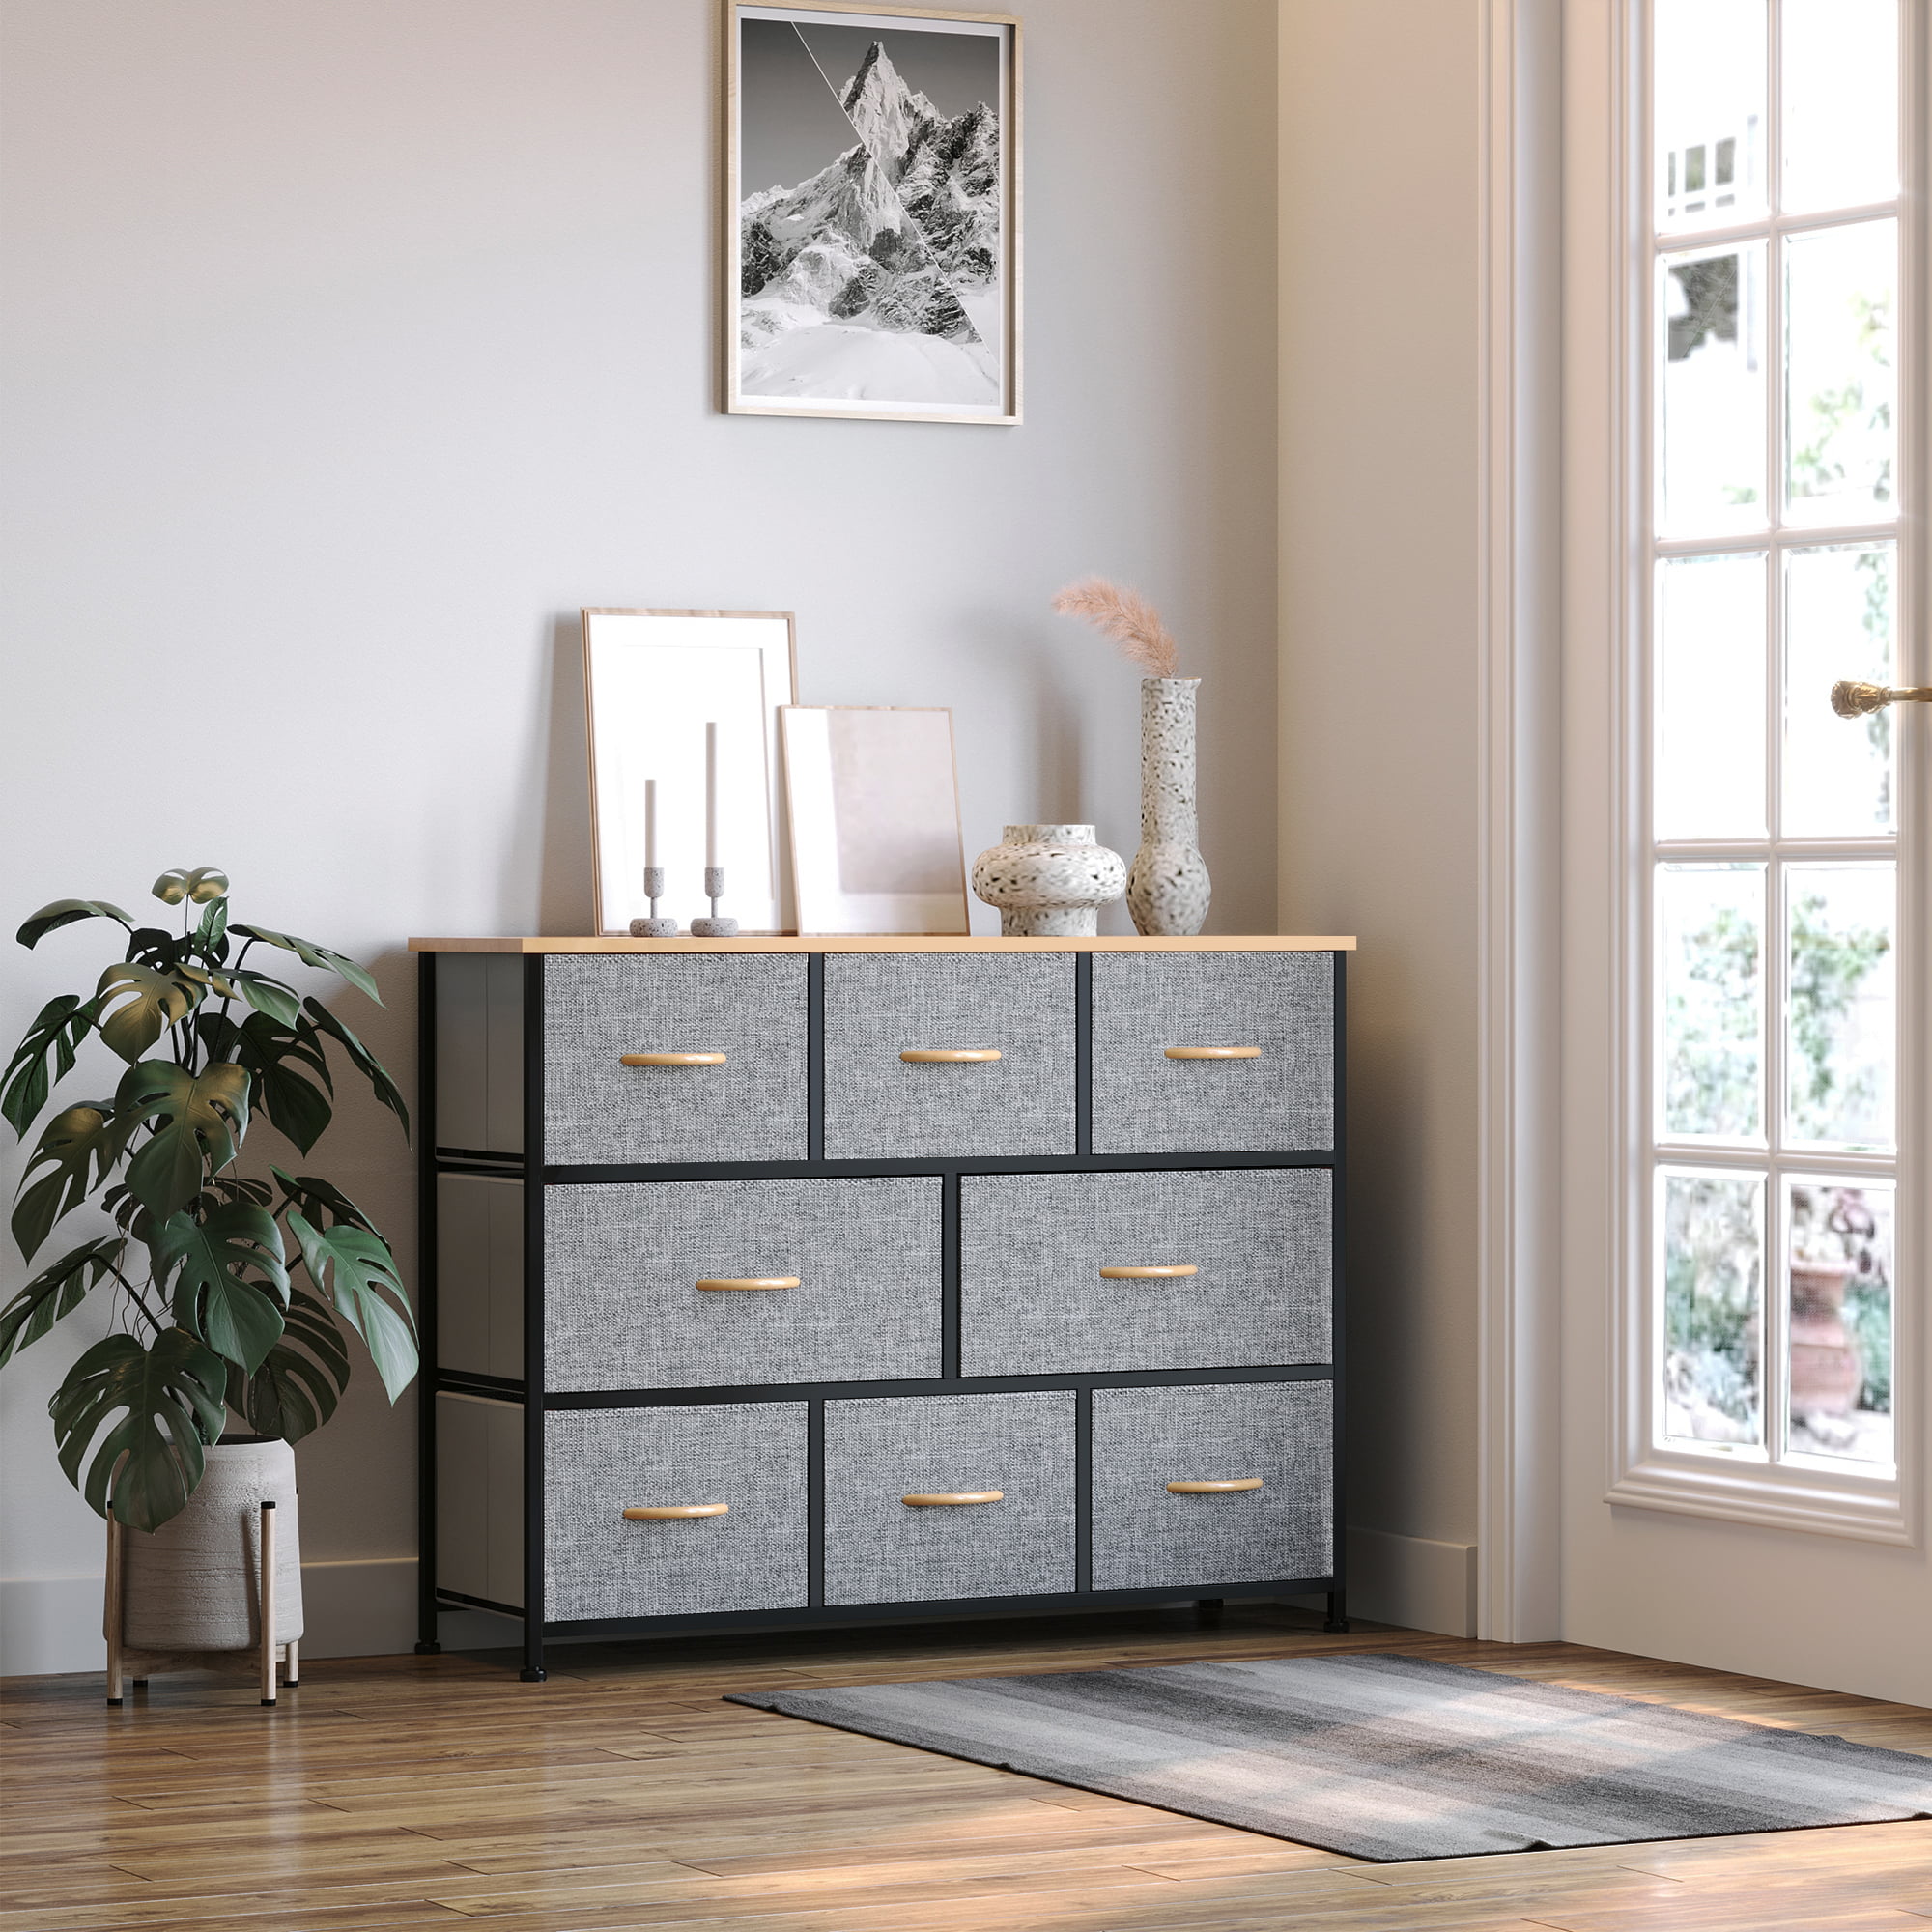 HOMCOM 7 Drawer Dresser Fabric Chest of Drawers 3 Tier Storage Organizer  for Bedroom Entryway Tower Unit with Steel Frame Wooden Top Light Grey